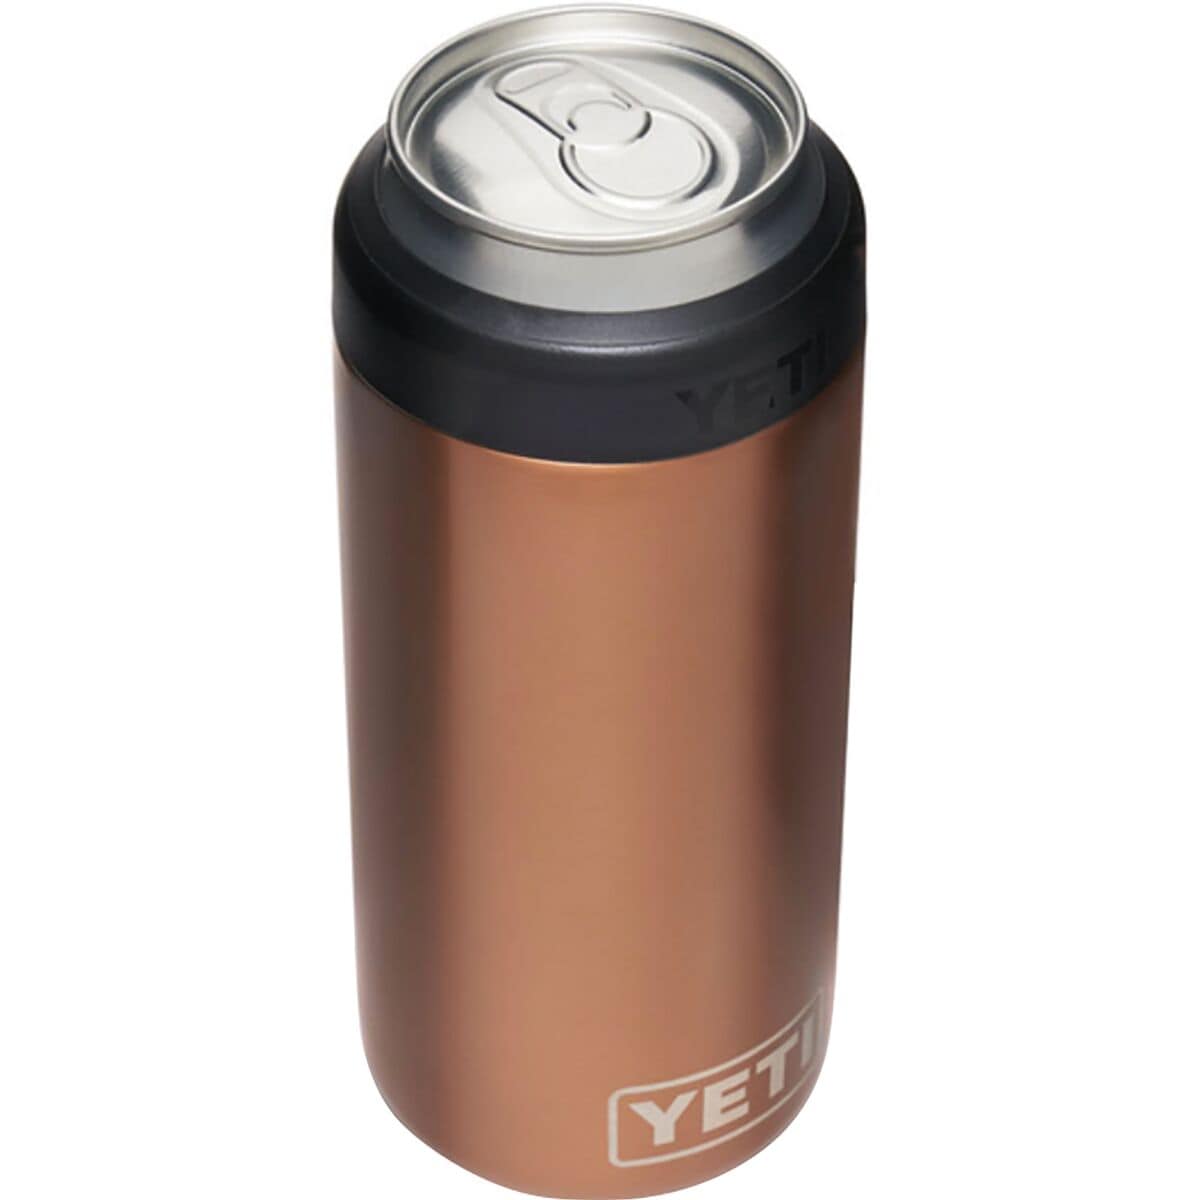 The Yeti Rambler Colster: An (Almost) Perfect Koozie • Hop Culture